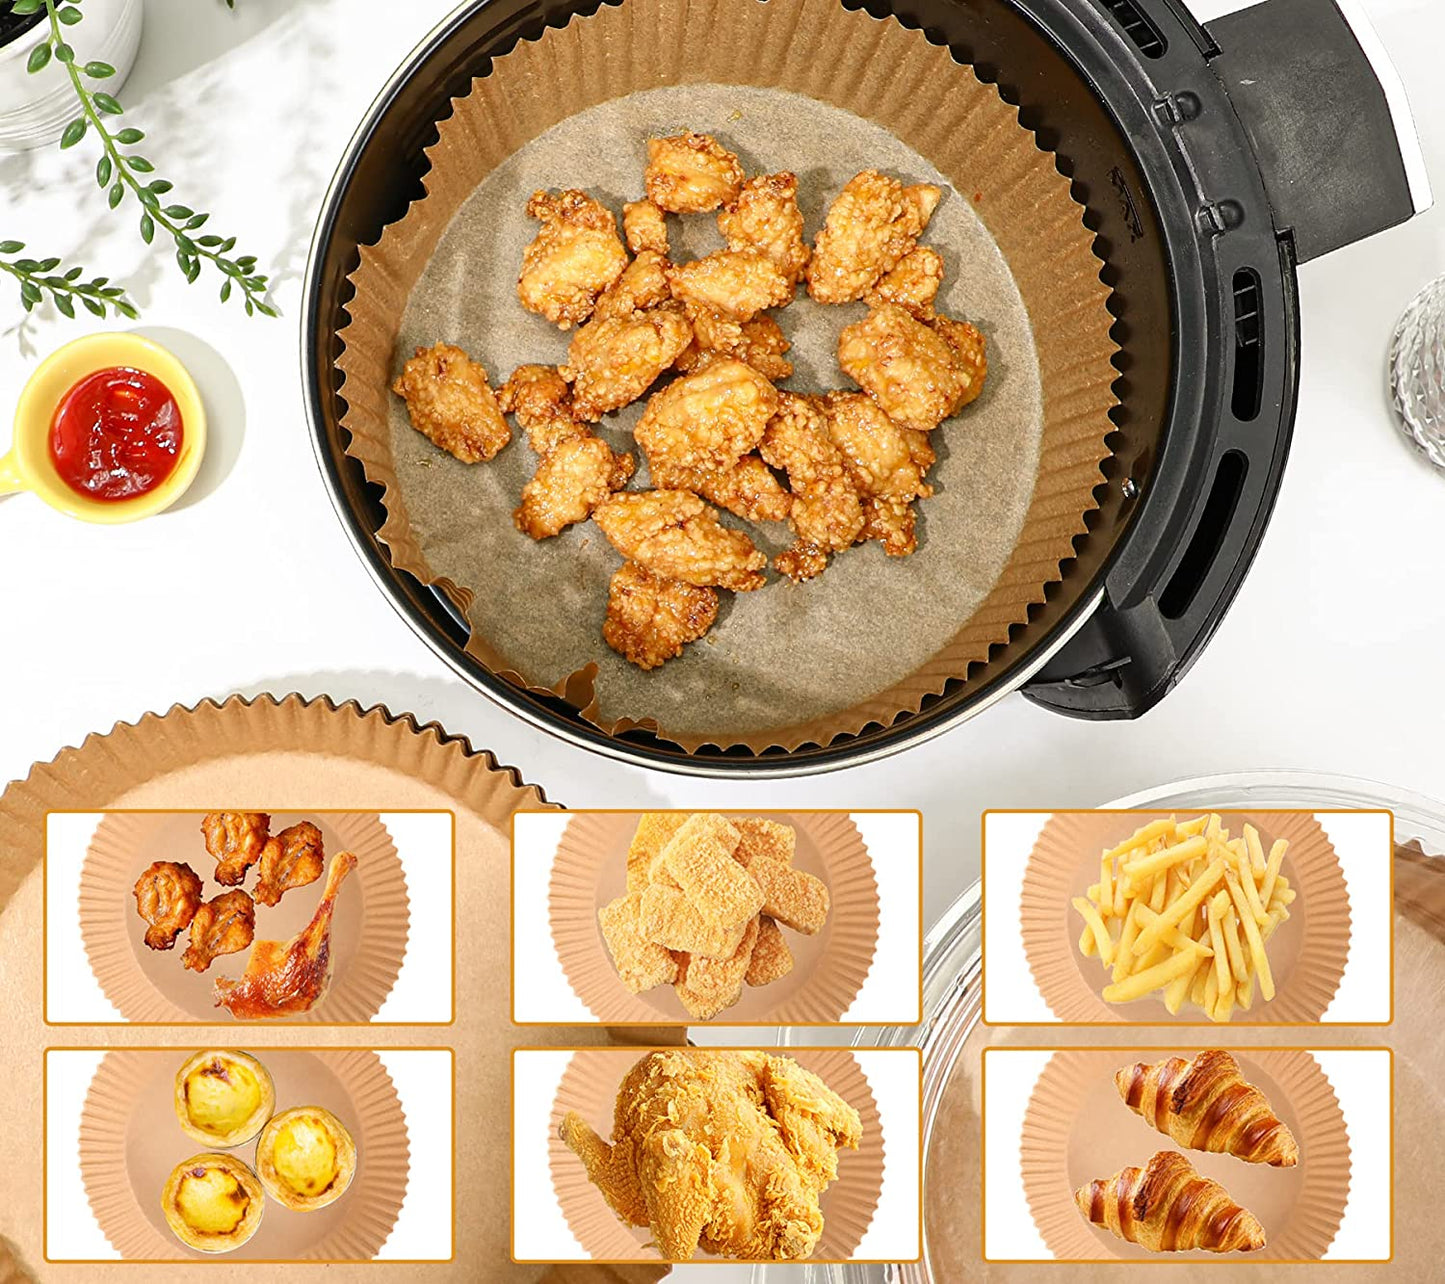 50pcs/pack Air Fryer Accessories, Silicone Oil Cup & Non-stick Paper Pad &  Round Paper Liners For Baking